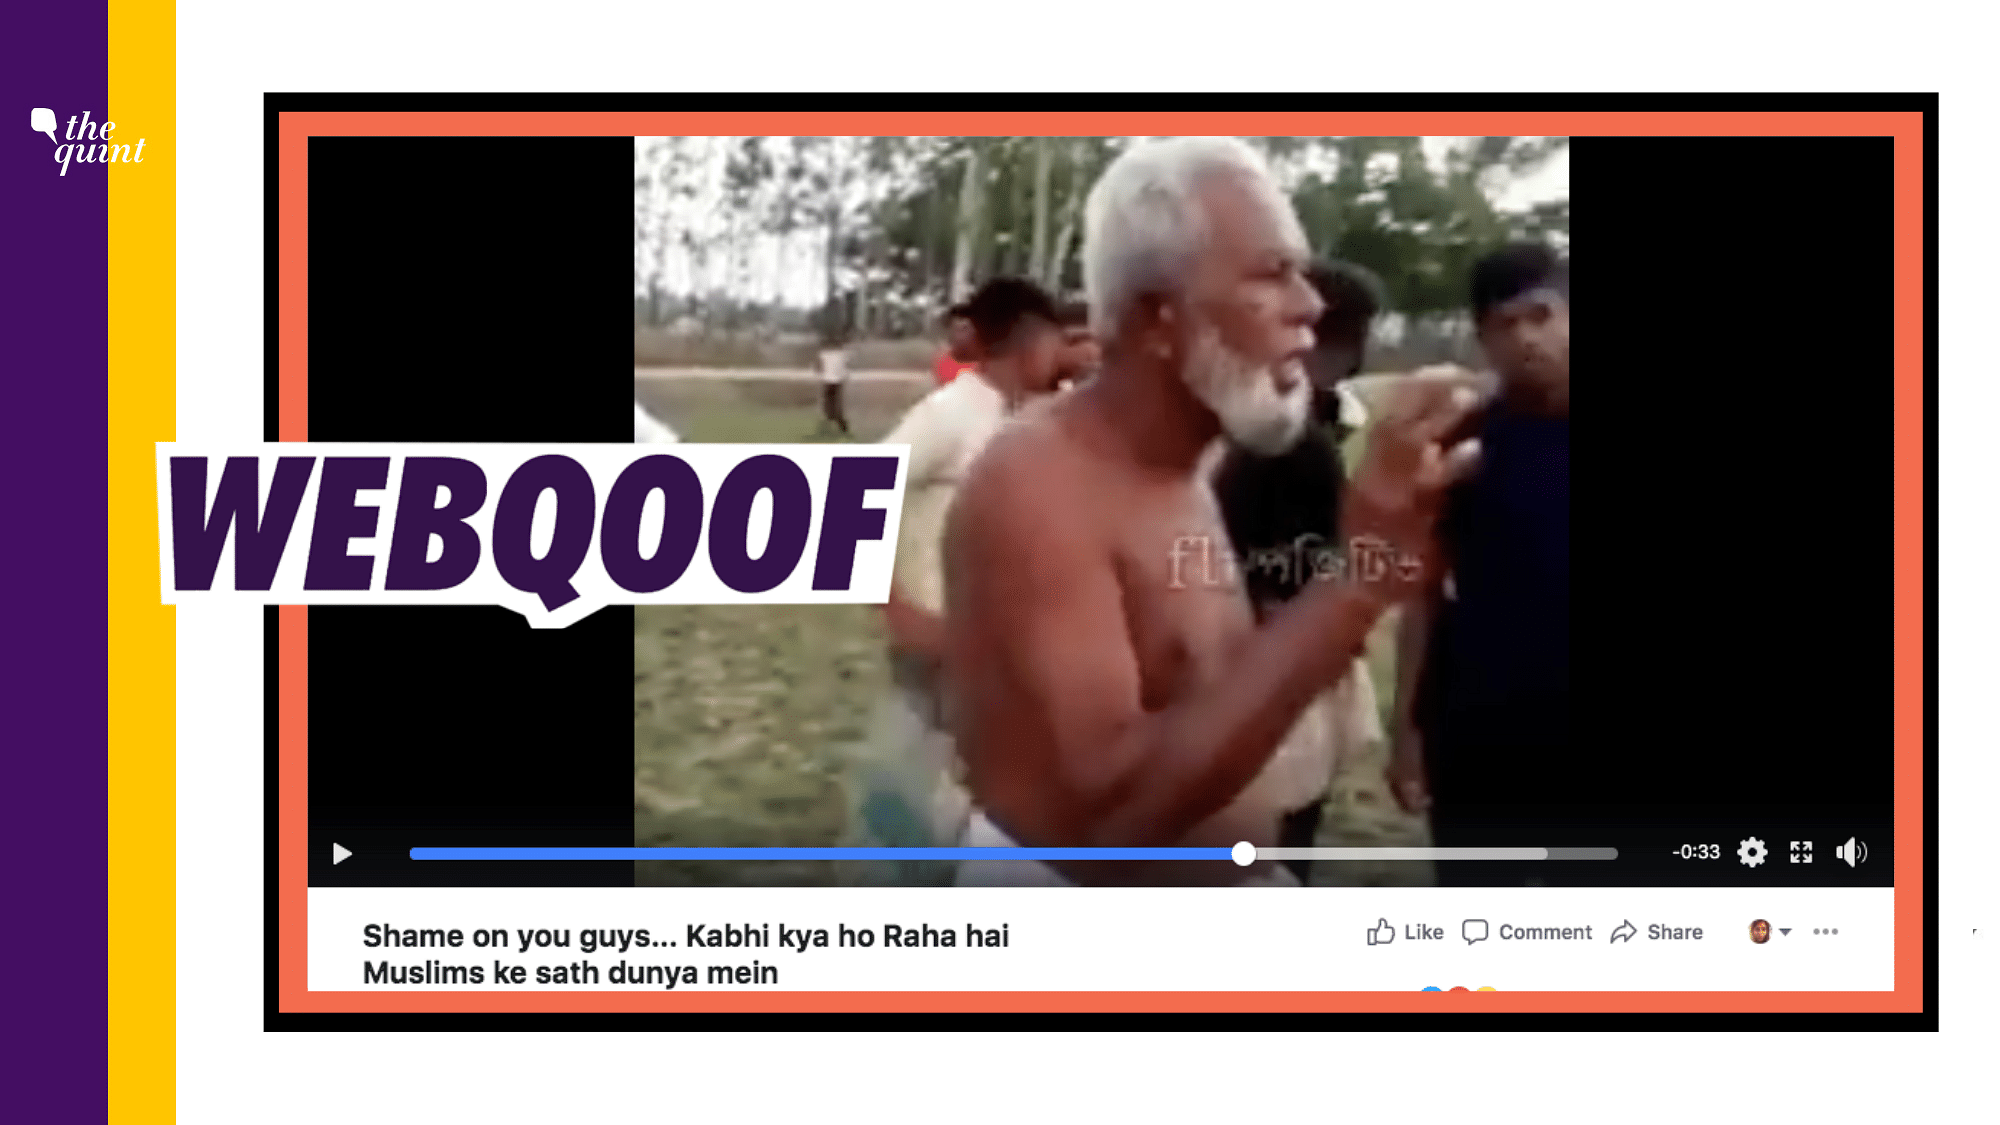 The video shows an old man being slapped, his lungi forcibly removed and his vest torn by a man, as others look on.